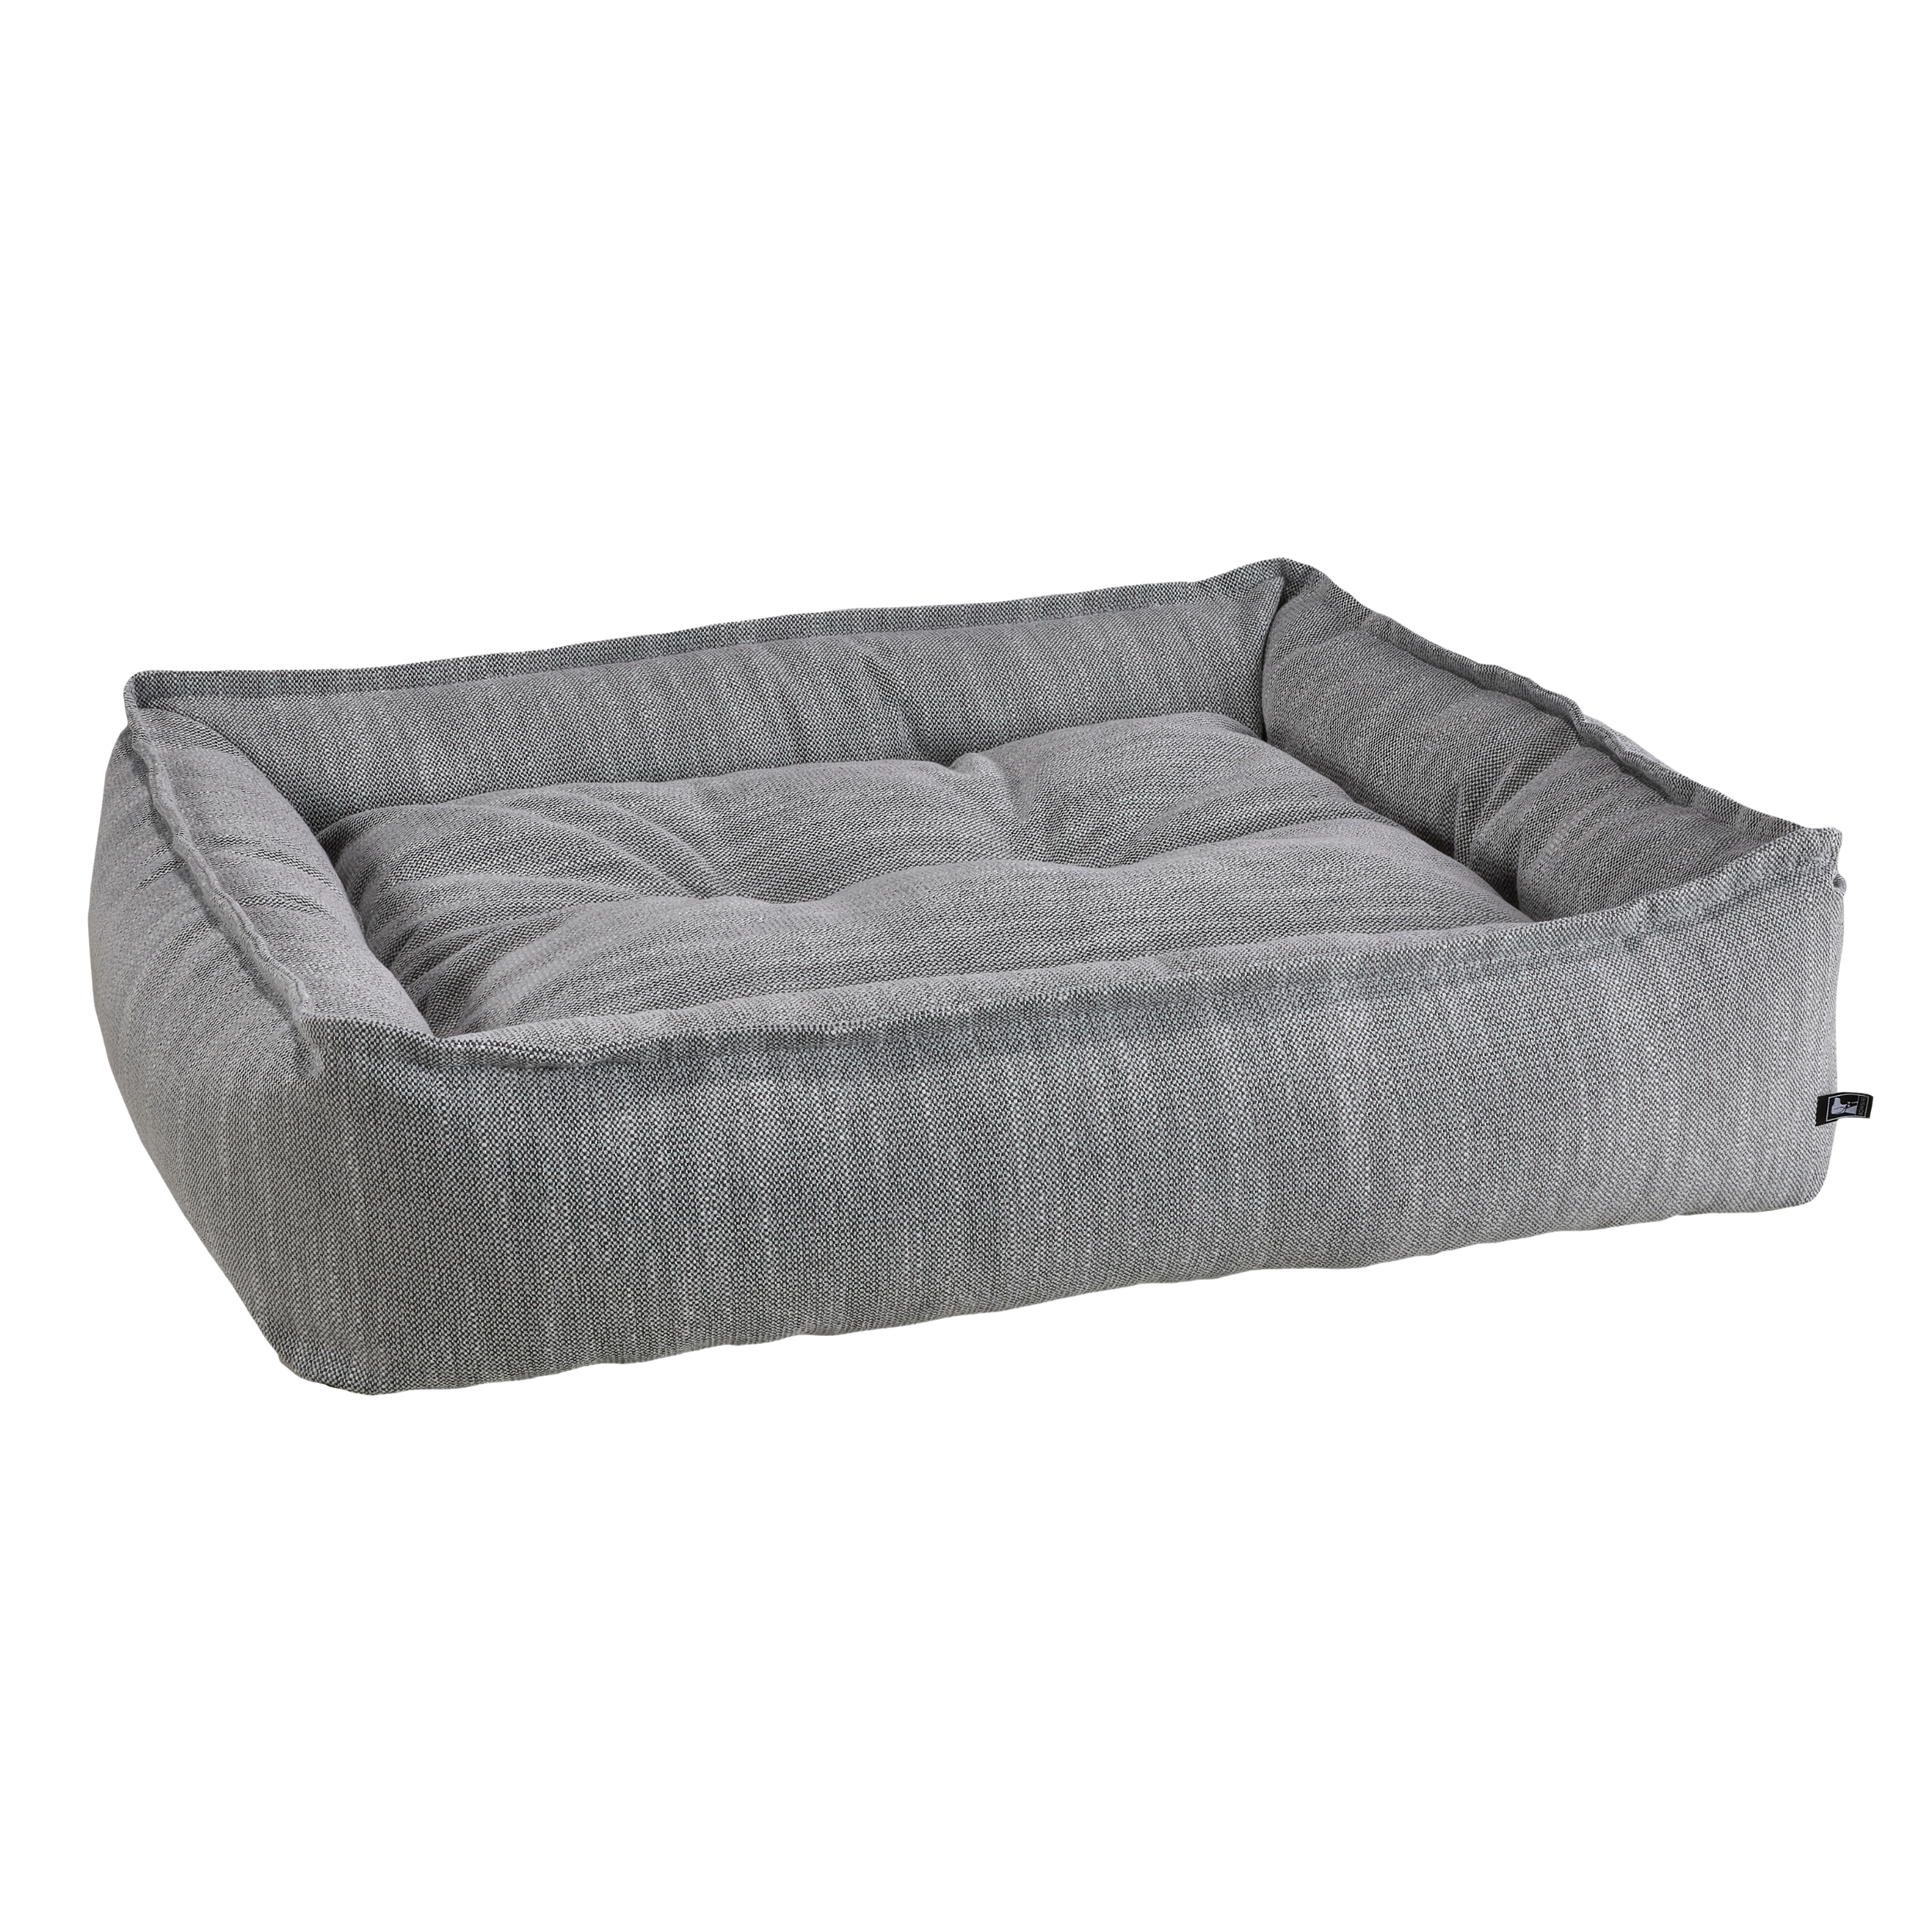 STONE-GRAY-STERLING-LOUNGE-DOG-BED